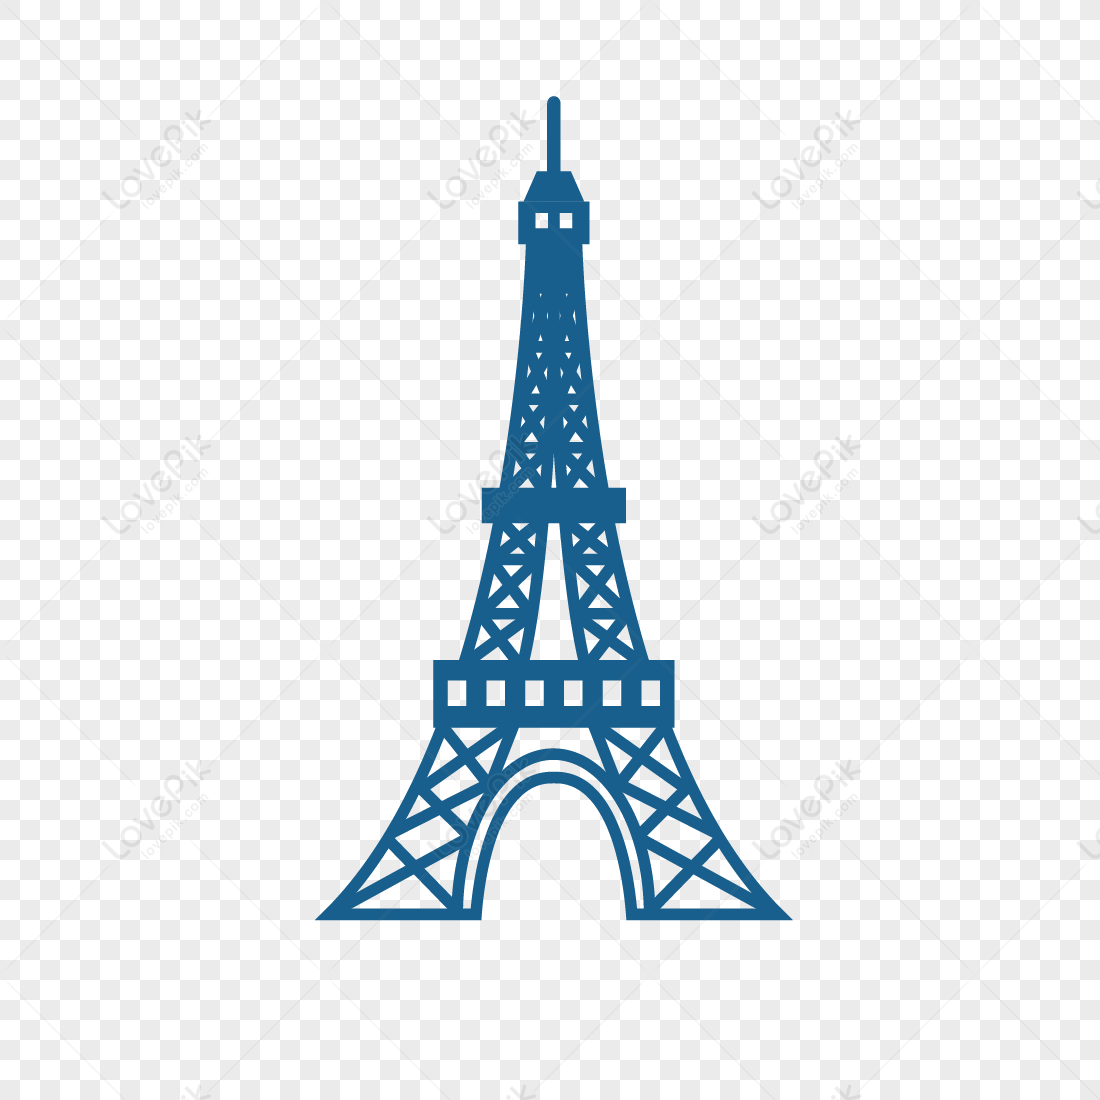 Eiffel Tower, material, eiffel tower, illustration png image